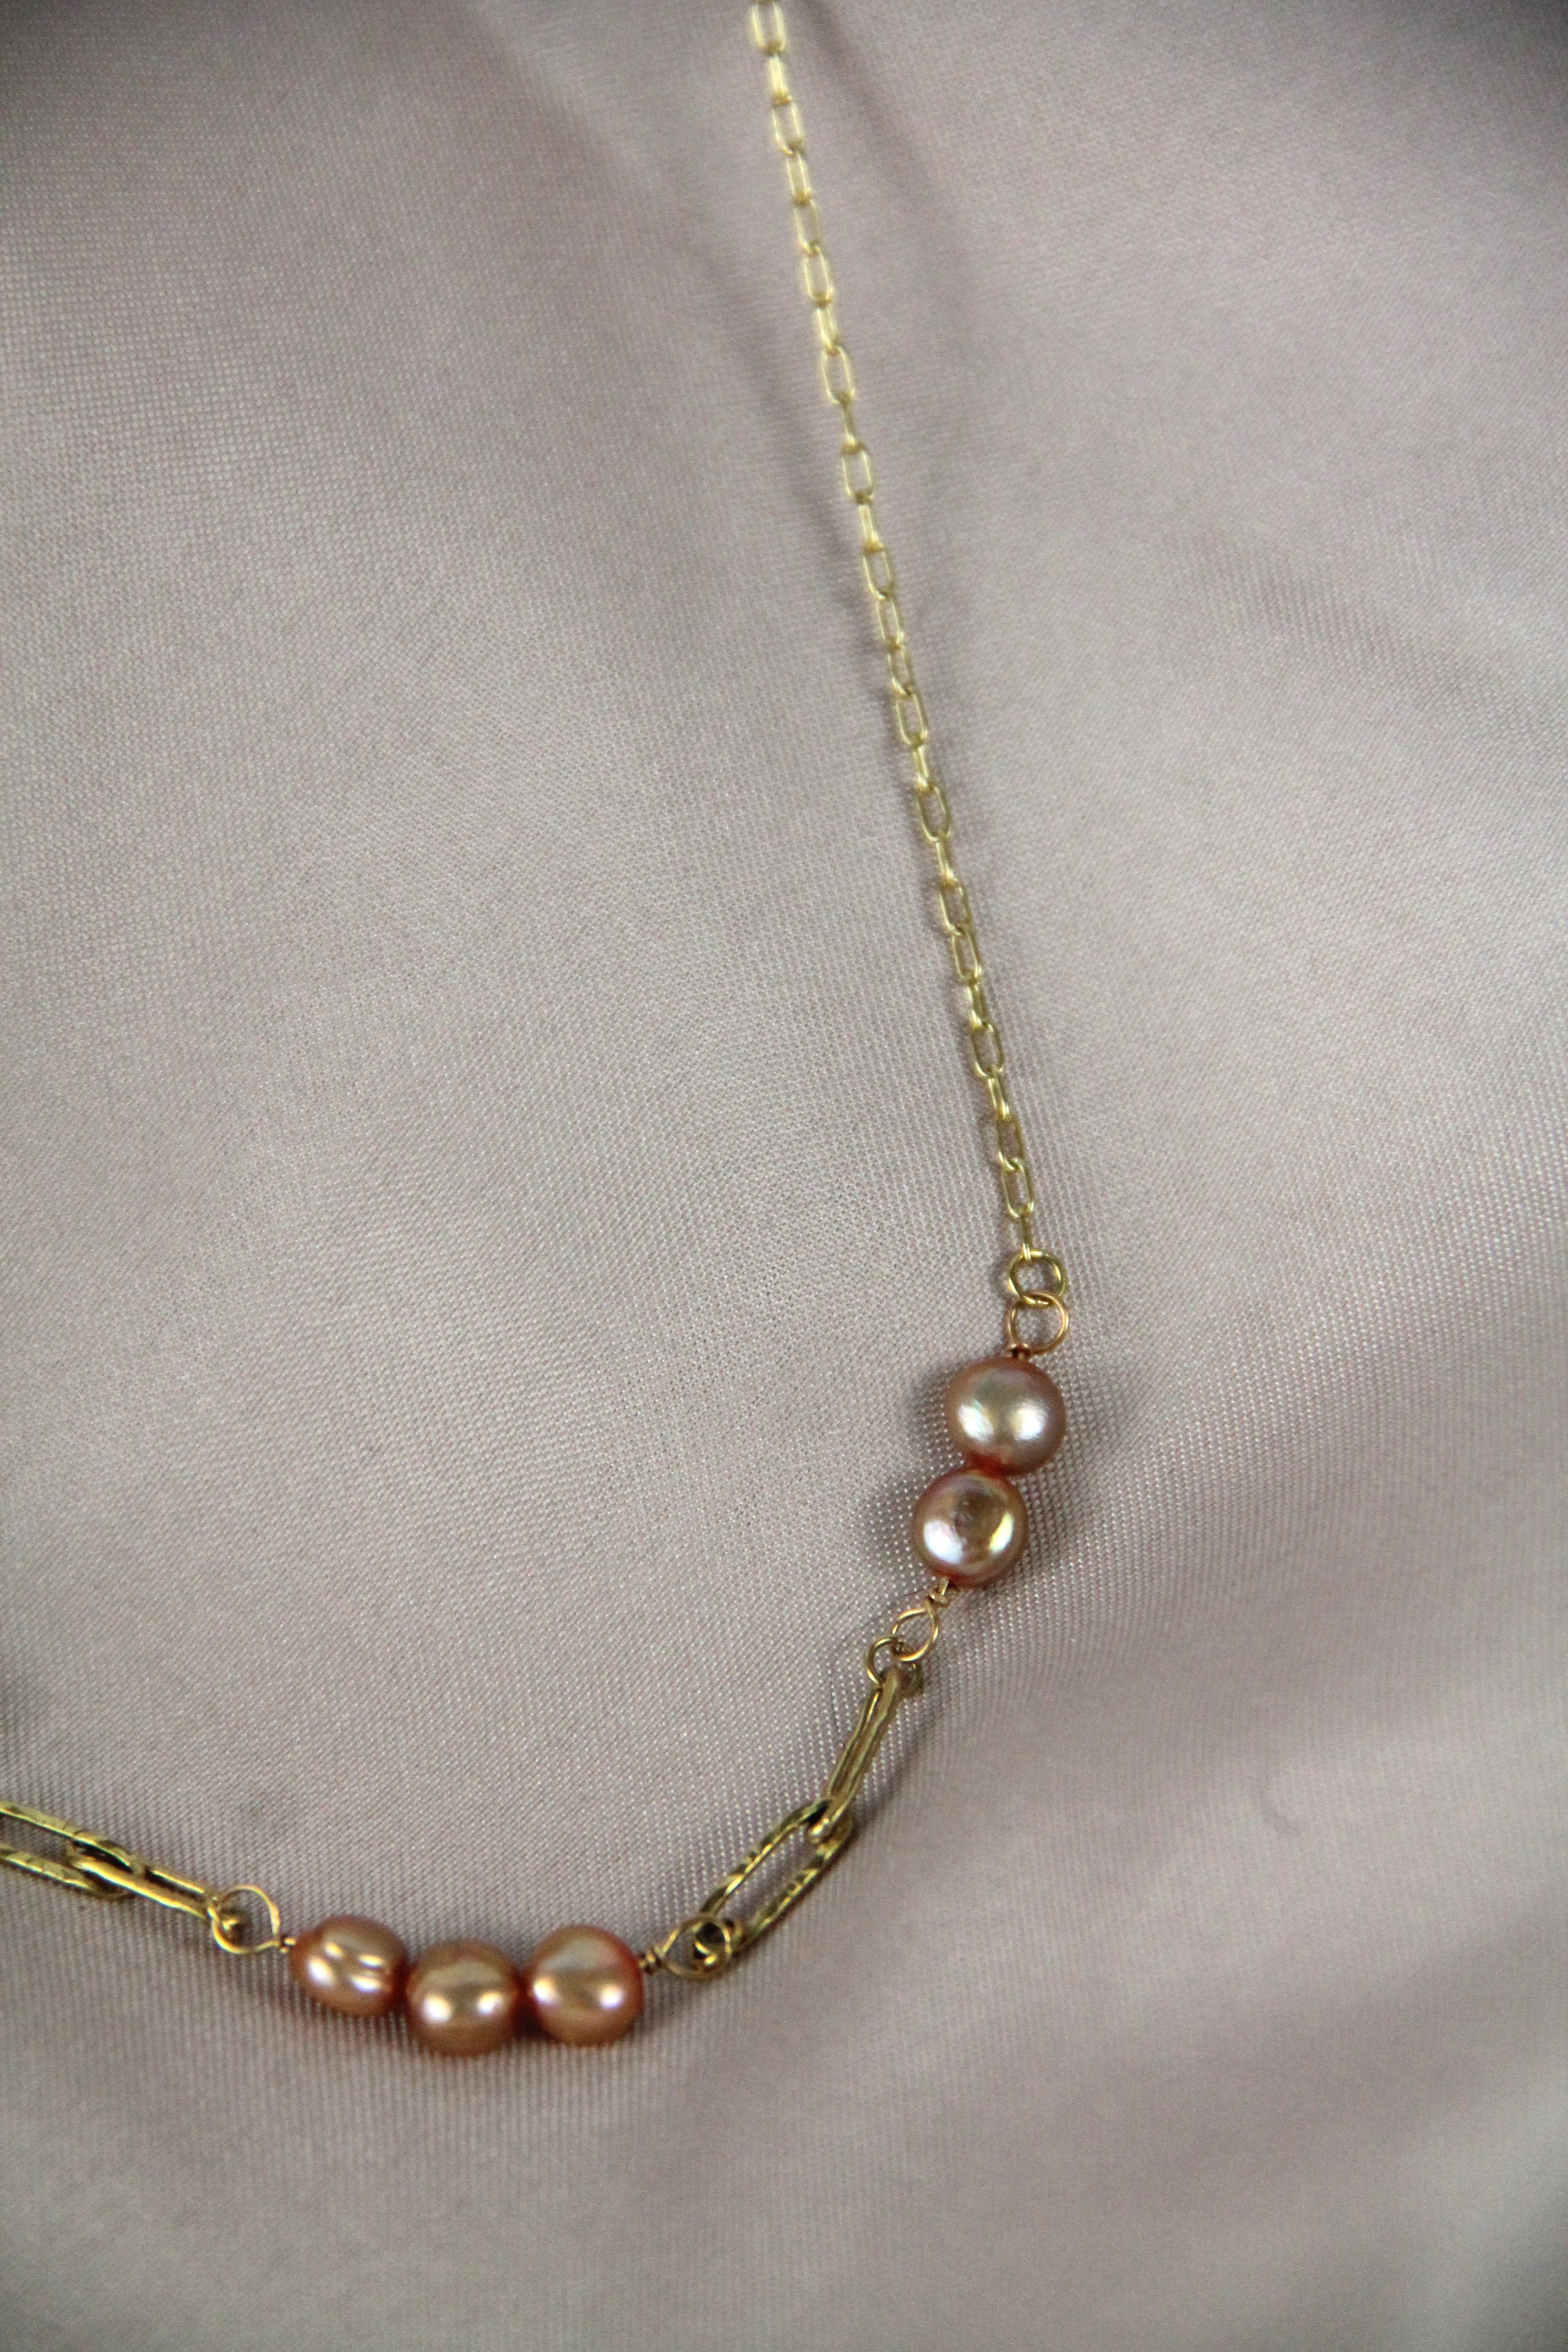 Pink, Champagne, and White colored baroque shape fresh water pearl necklace  – Jewelry by Glassando